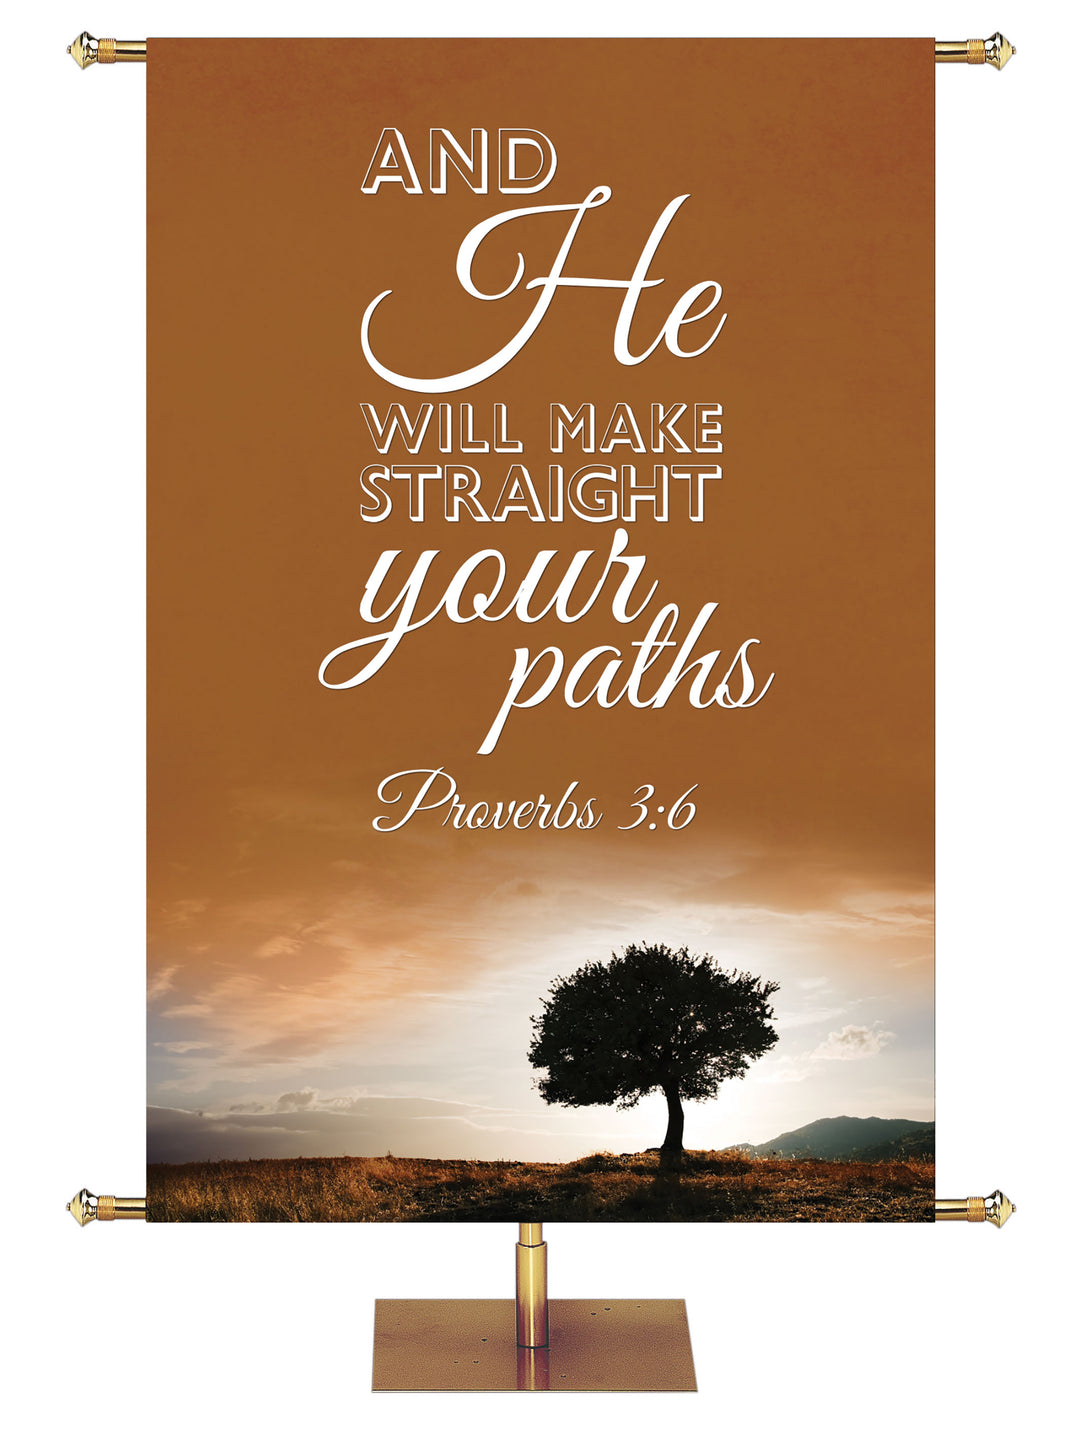 Straight Paths Banner Words of Wisdom Proverbs 3:6 in Blue, Green, Purple, Red, Sienna, Teal